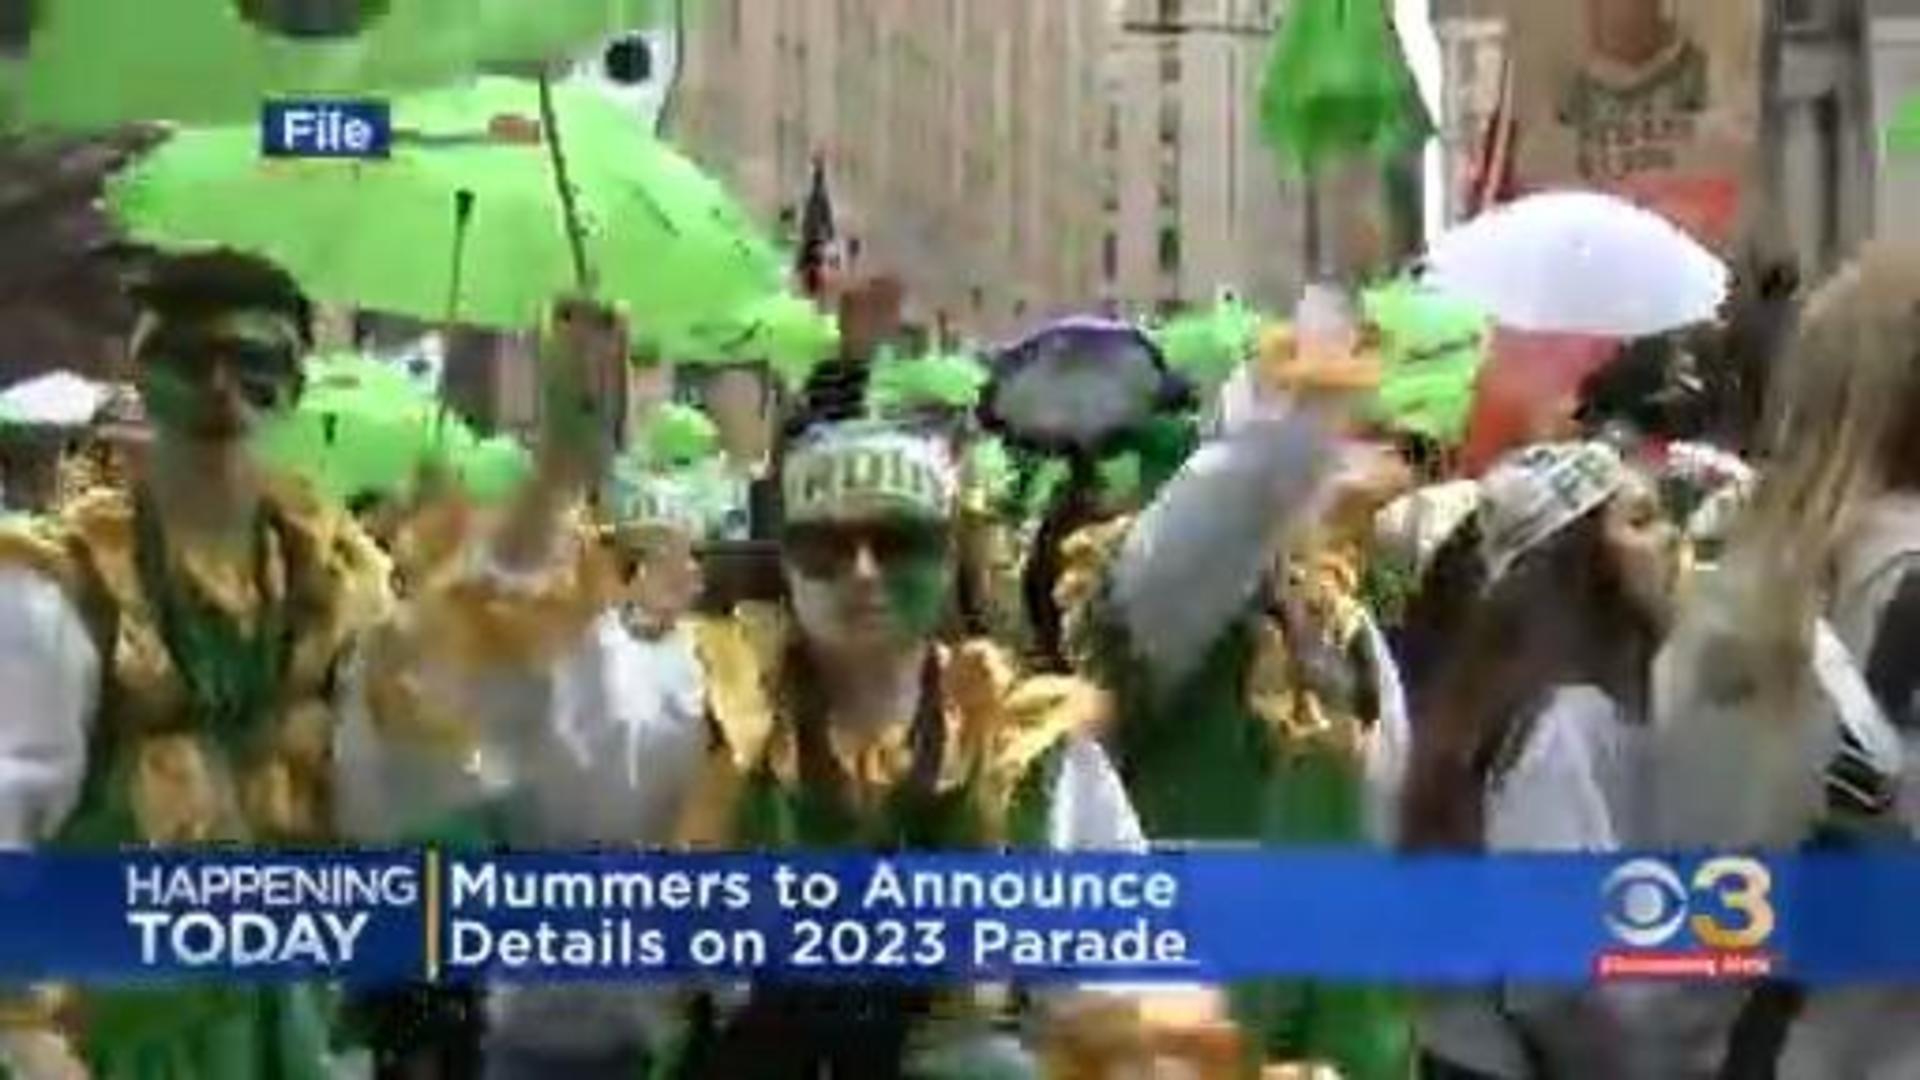 Mummers to announce details about upcoming 2023 parade